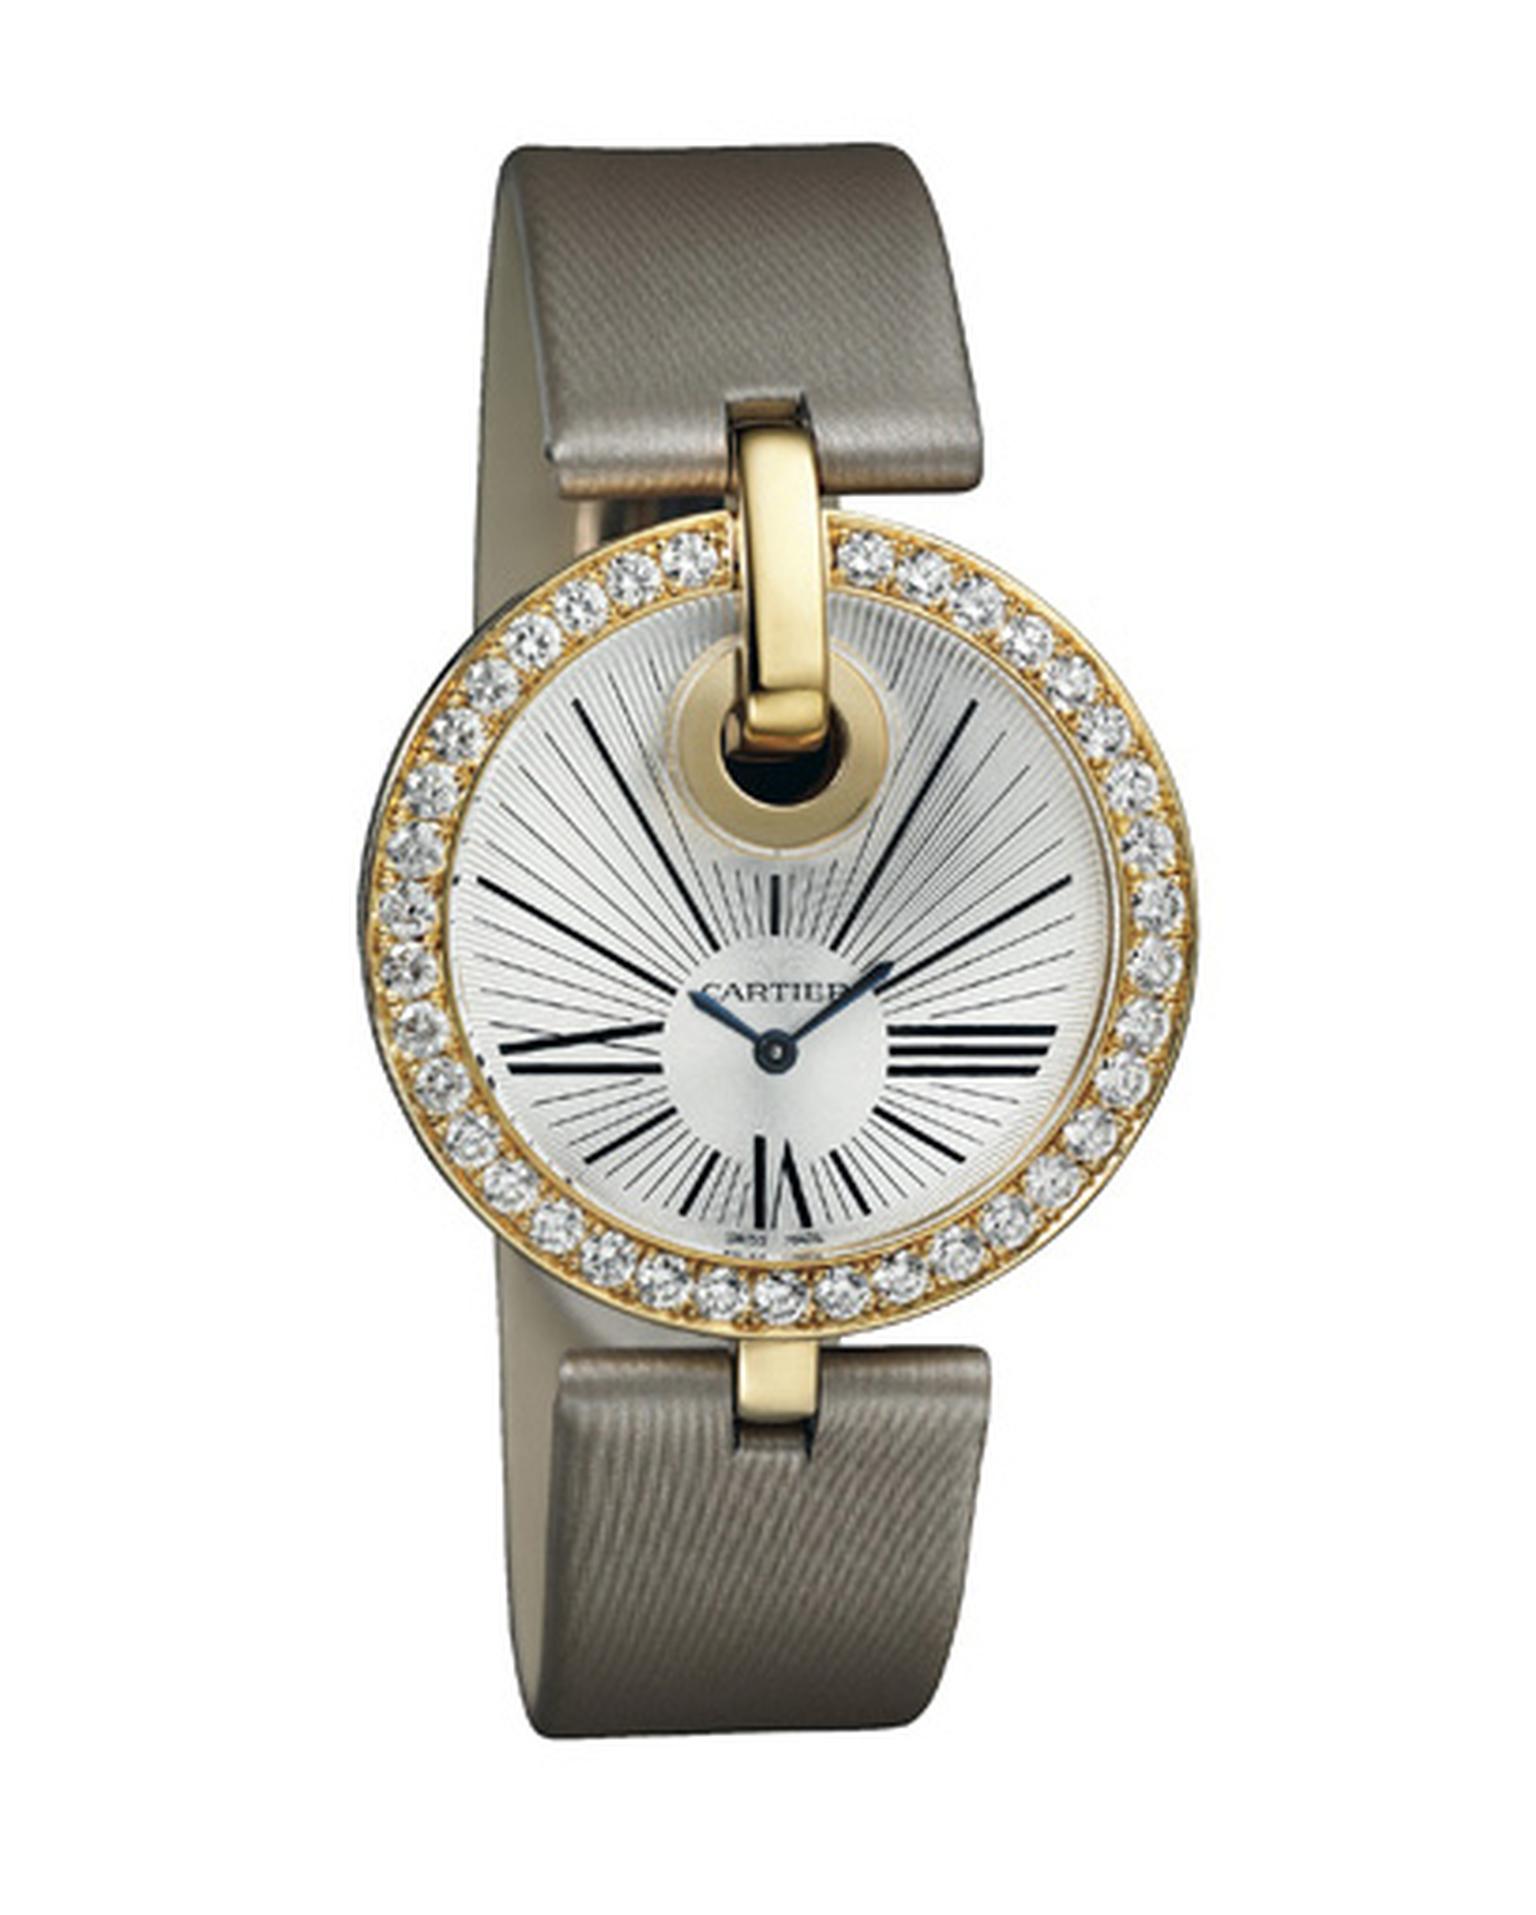 Cartier. Captive de Cartier watch. LM model 35mm, diamonds and yellow gold. Price from £24,000.jpg